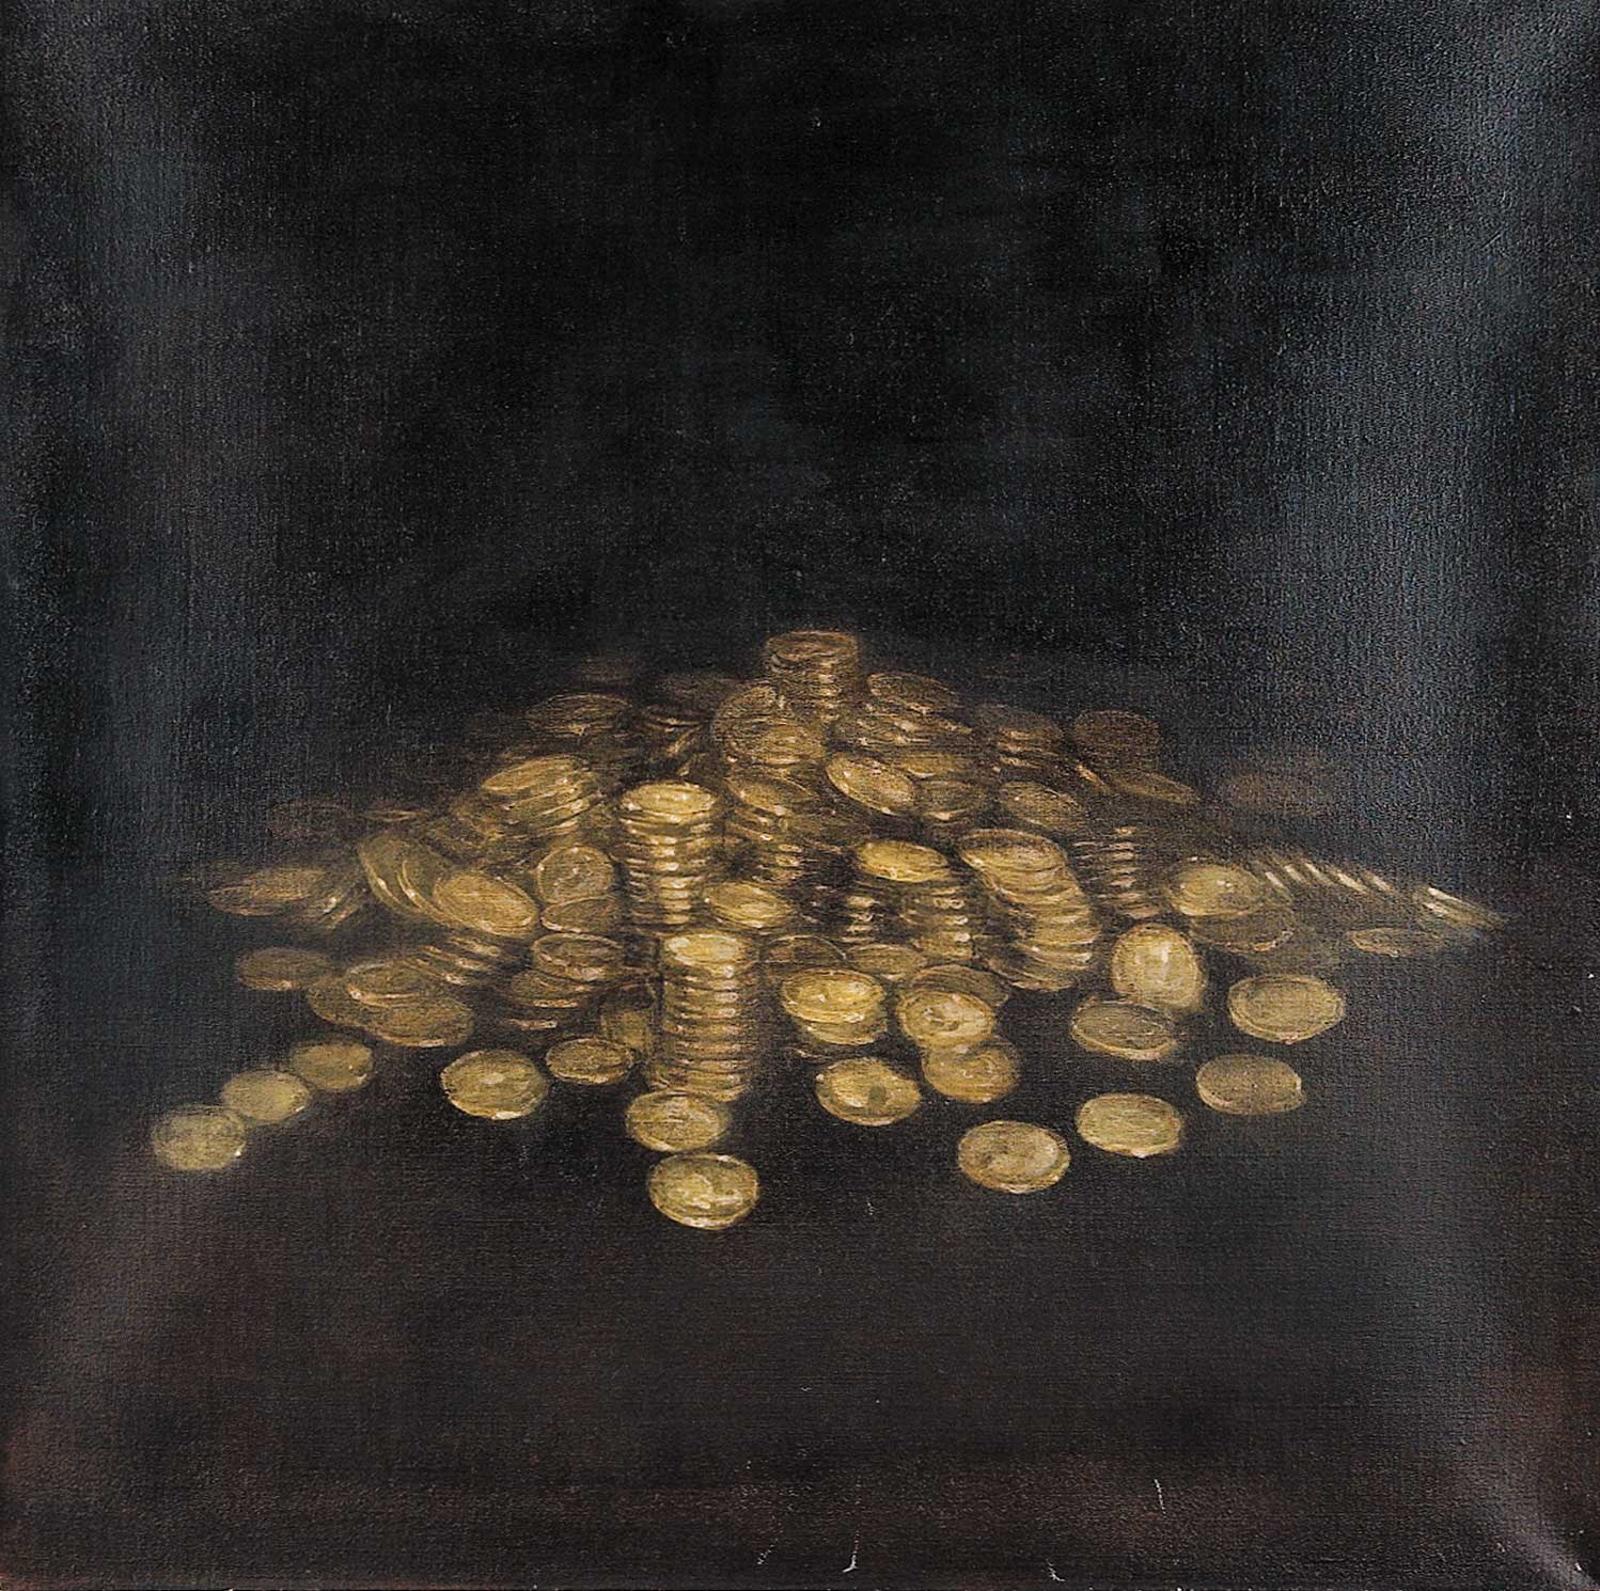 Neil Wedman (1954) - Untitled - Coins